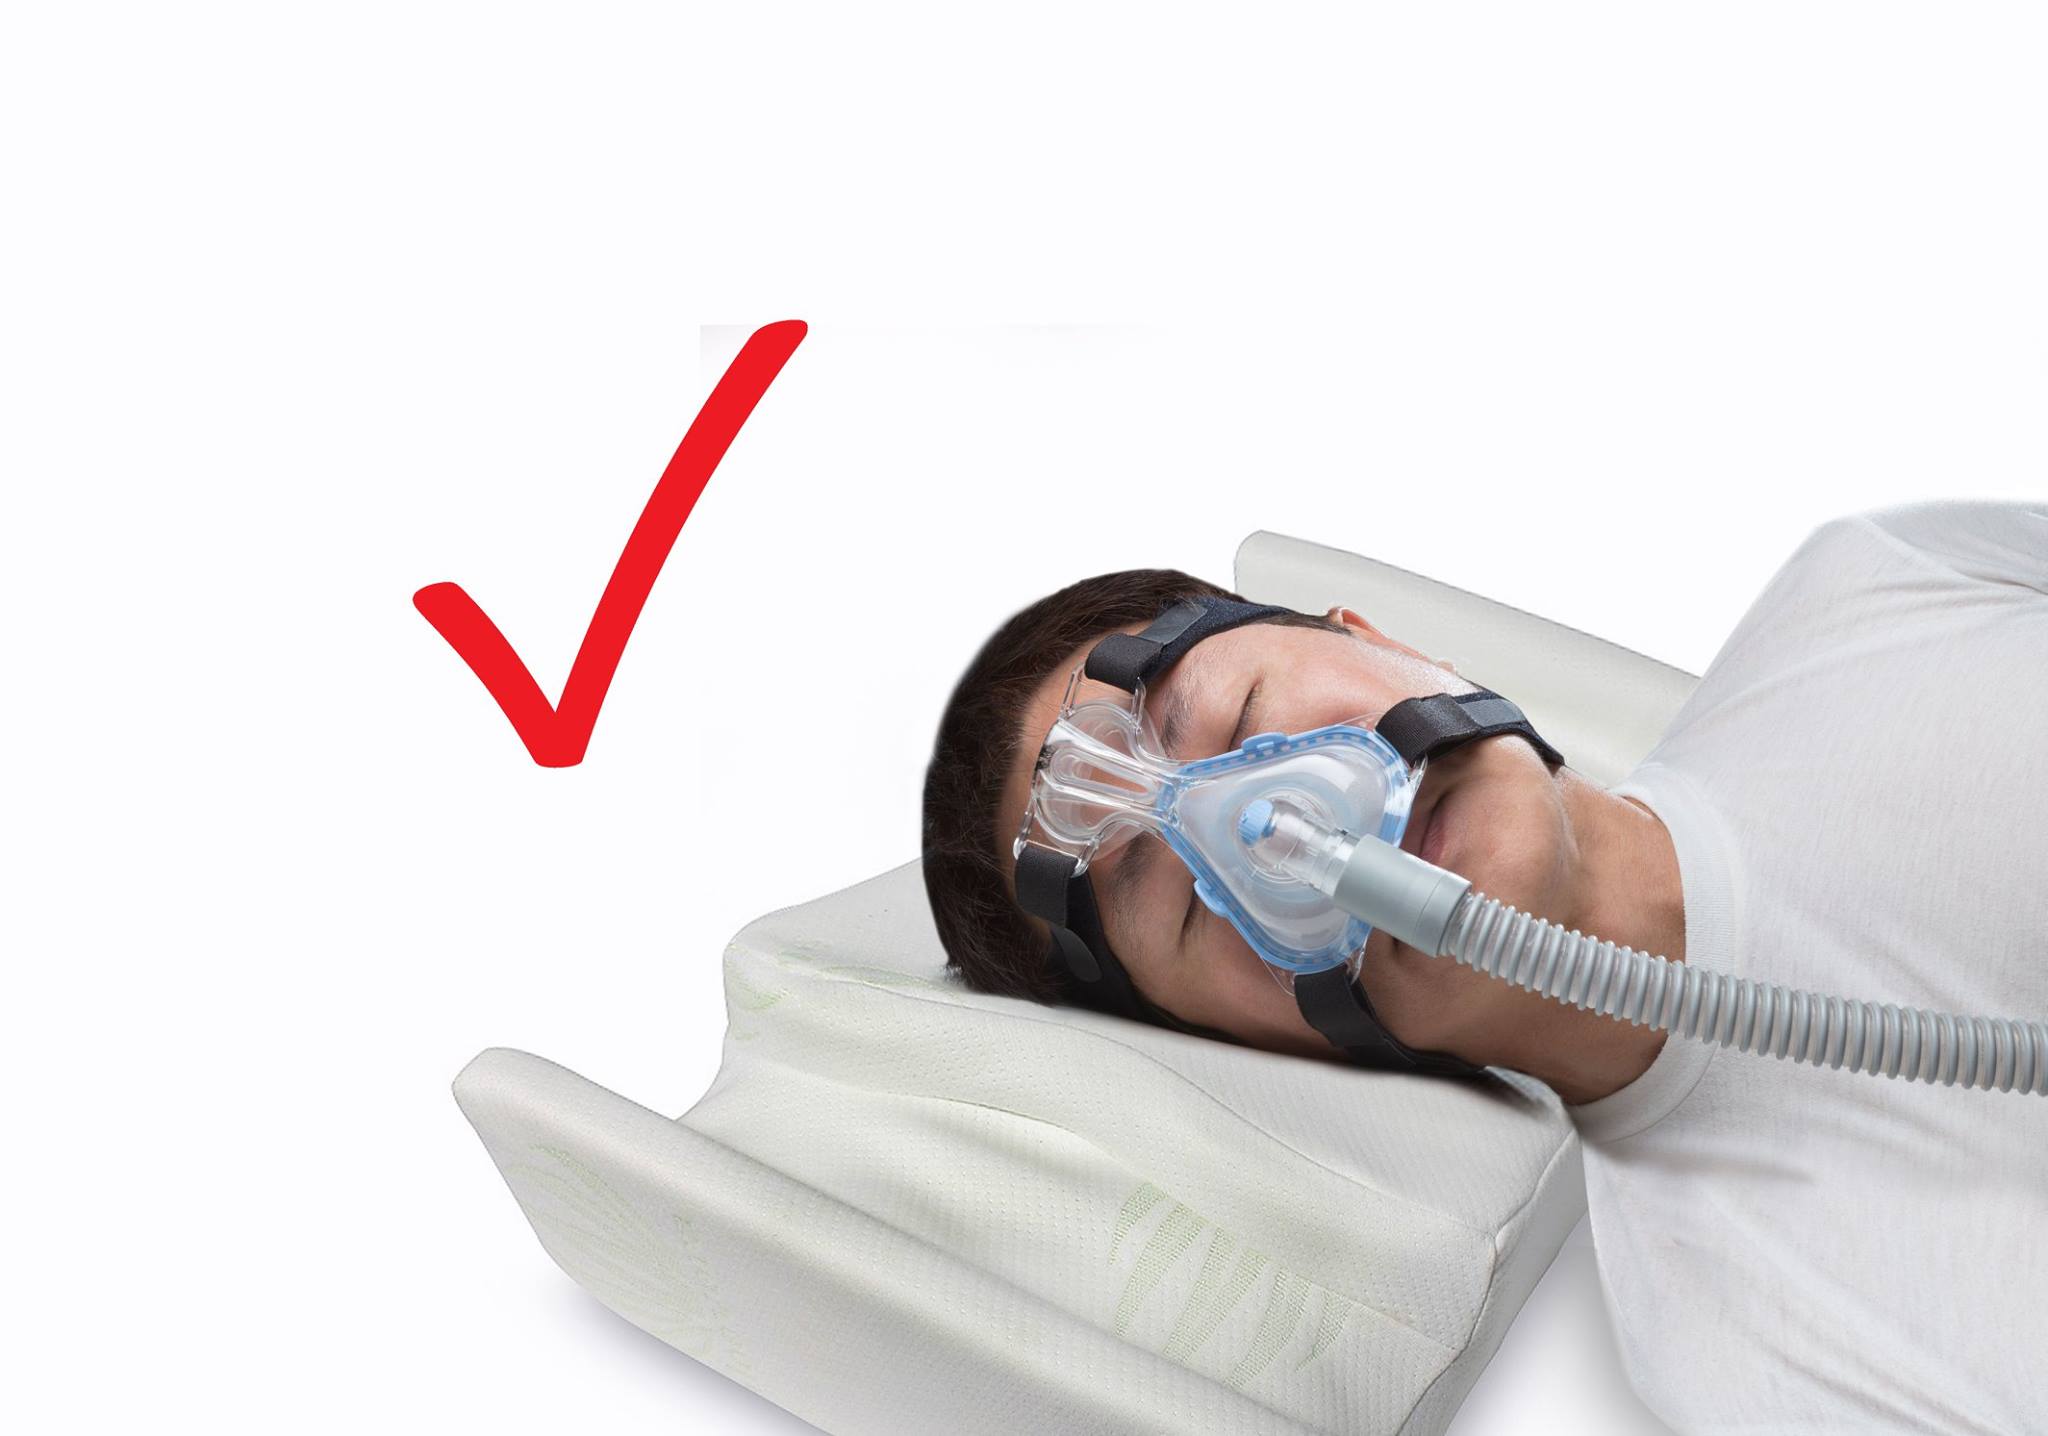 Sleep Apnea patients have benefited from these two pillows